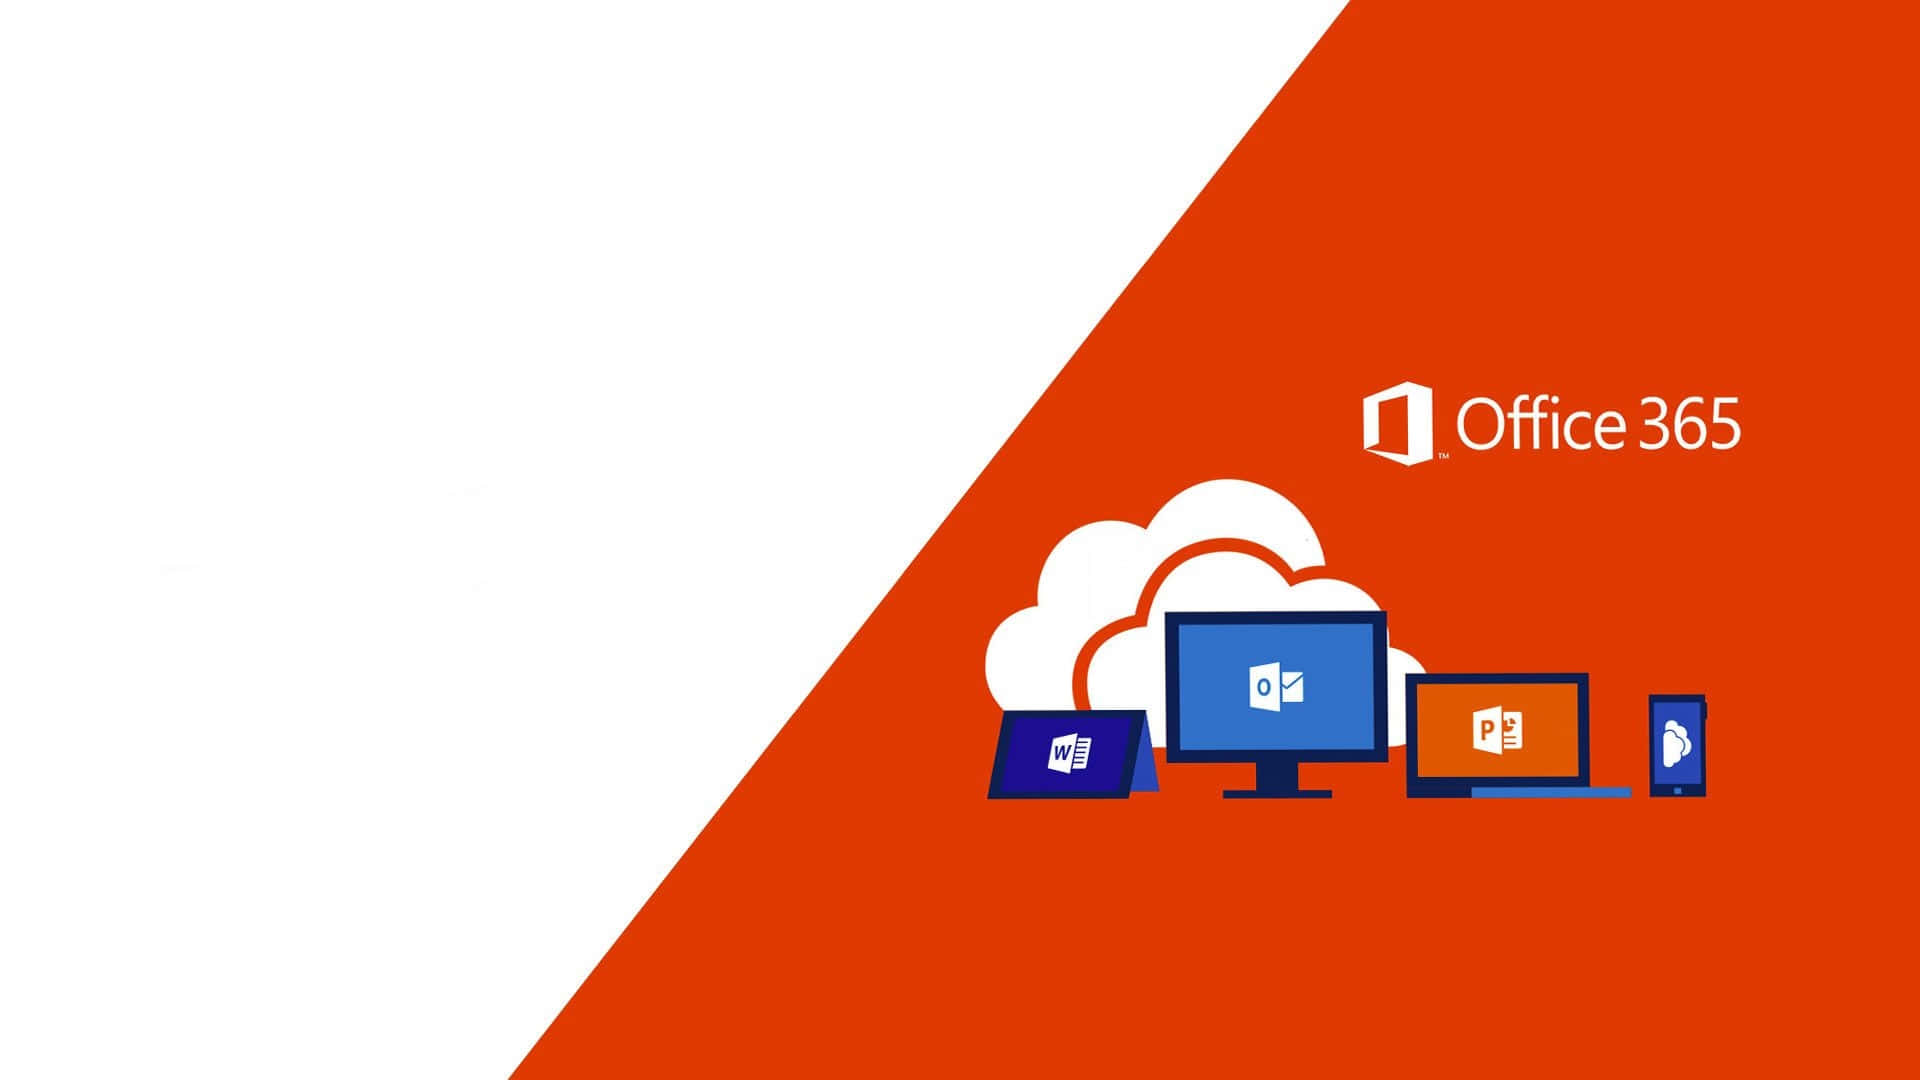 Stay connected and on top of your tasks with Office 365